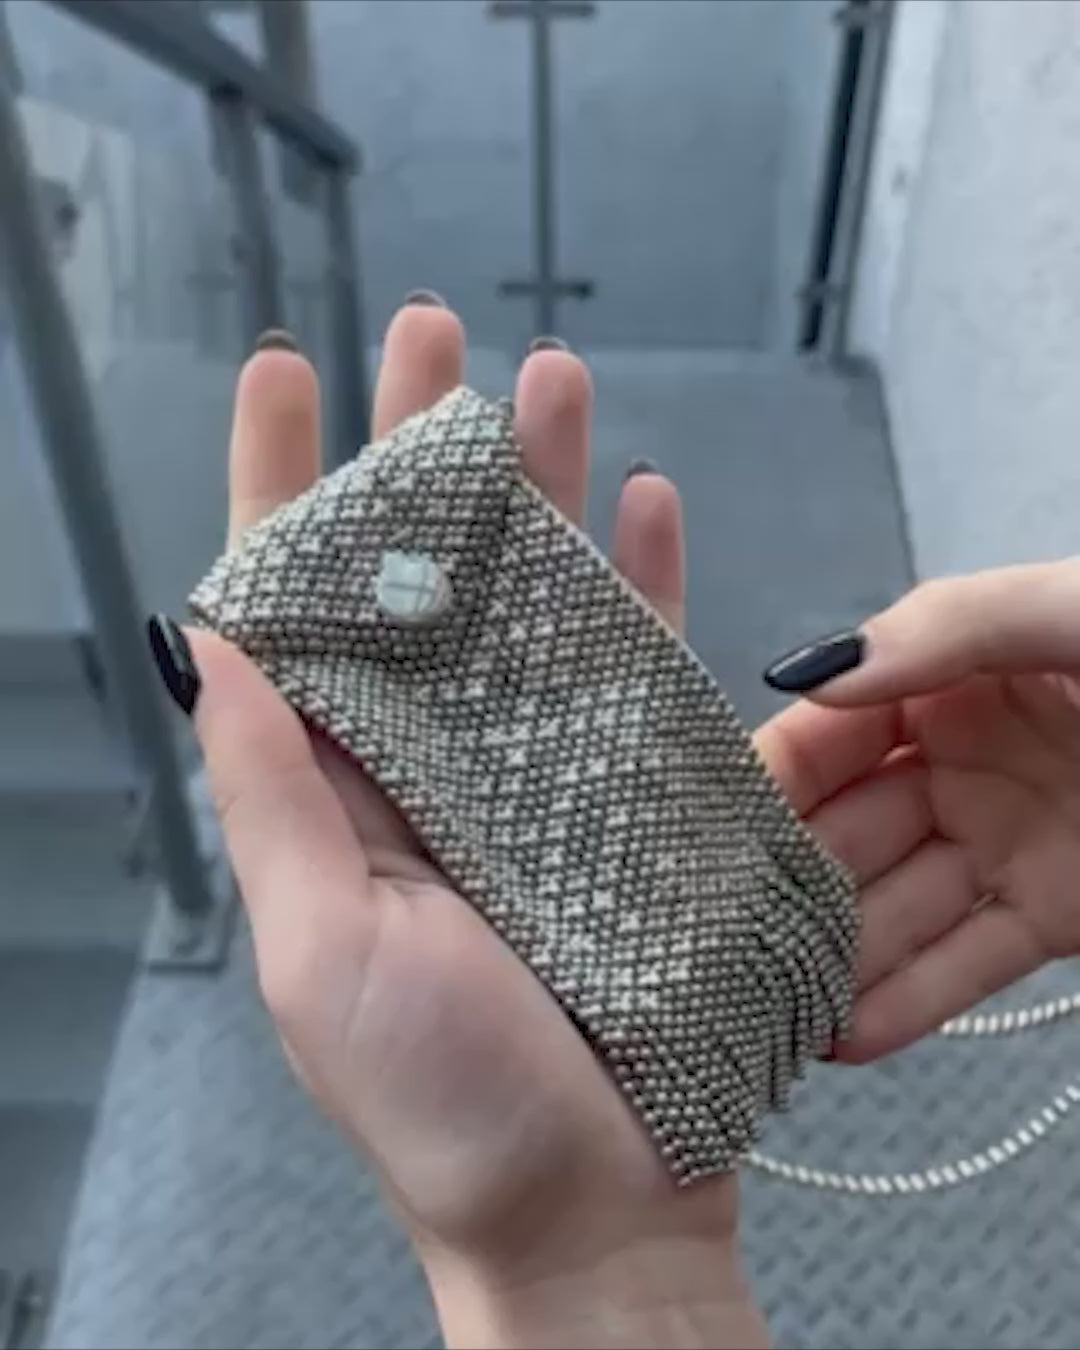 Silver Chainmail Bag